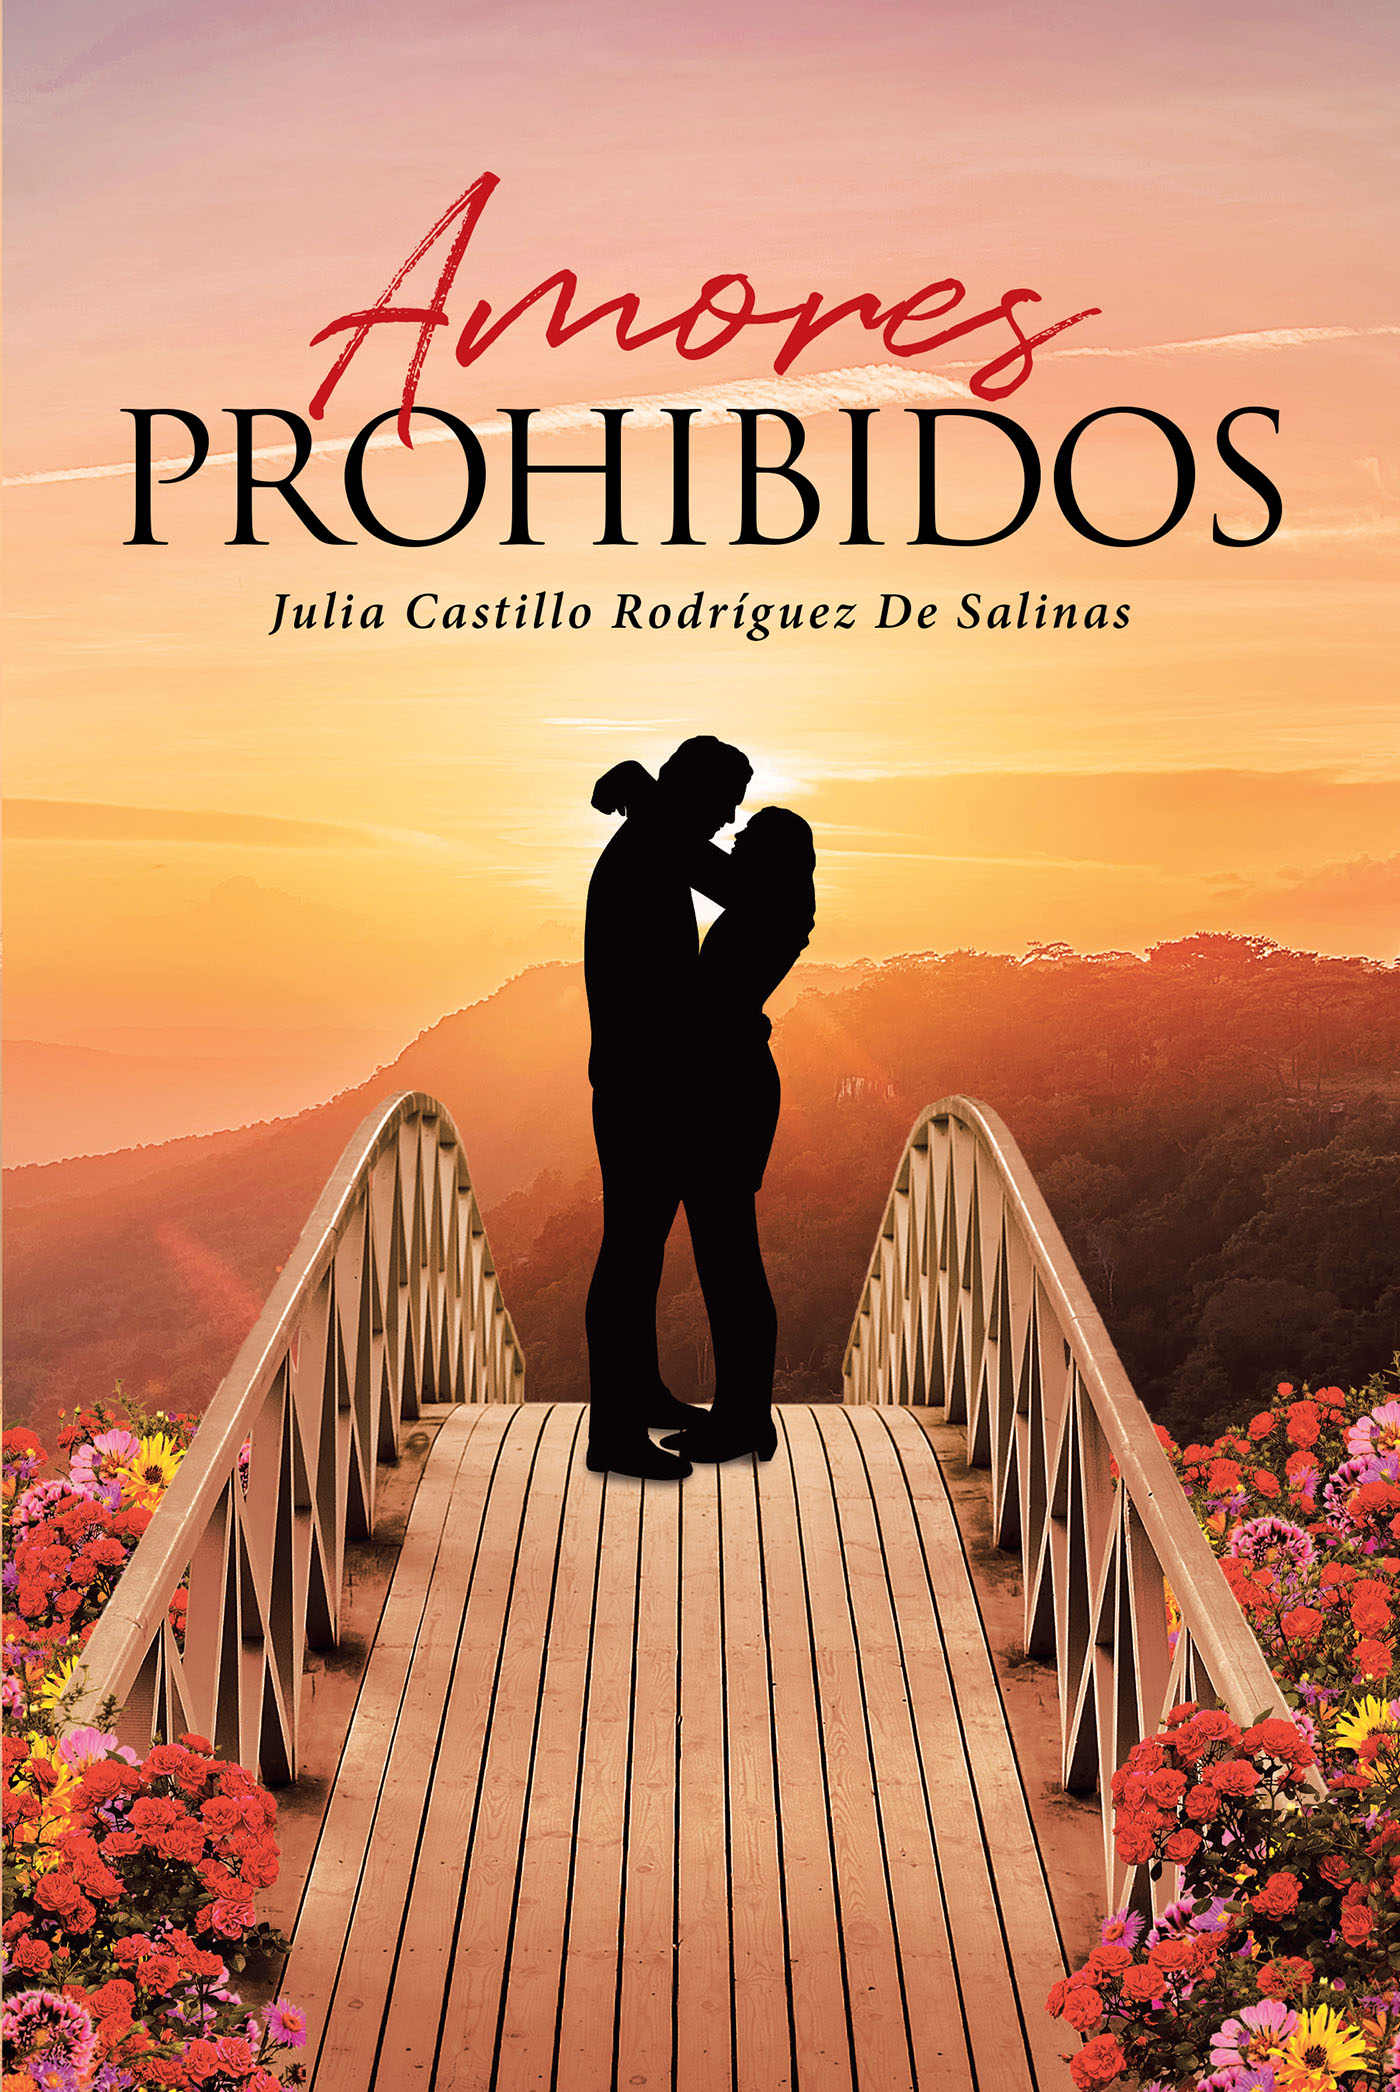 Julia Castillo Rodriguez De Salinas’s "Amores Prohibidos" is a Passionate Recollection on Love and Its Consequences